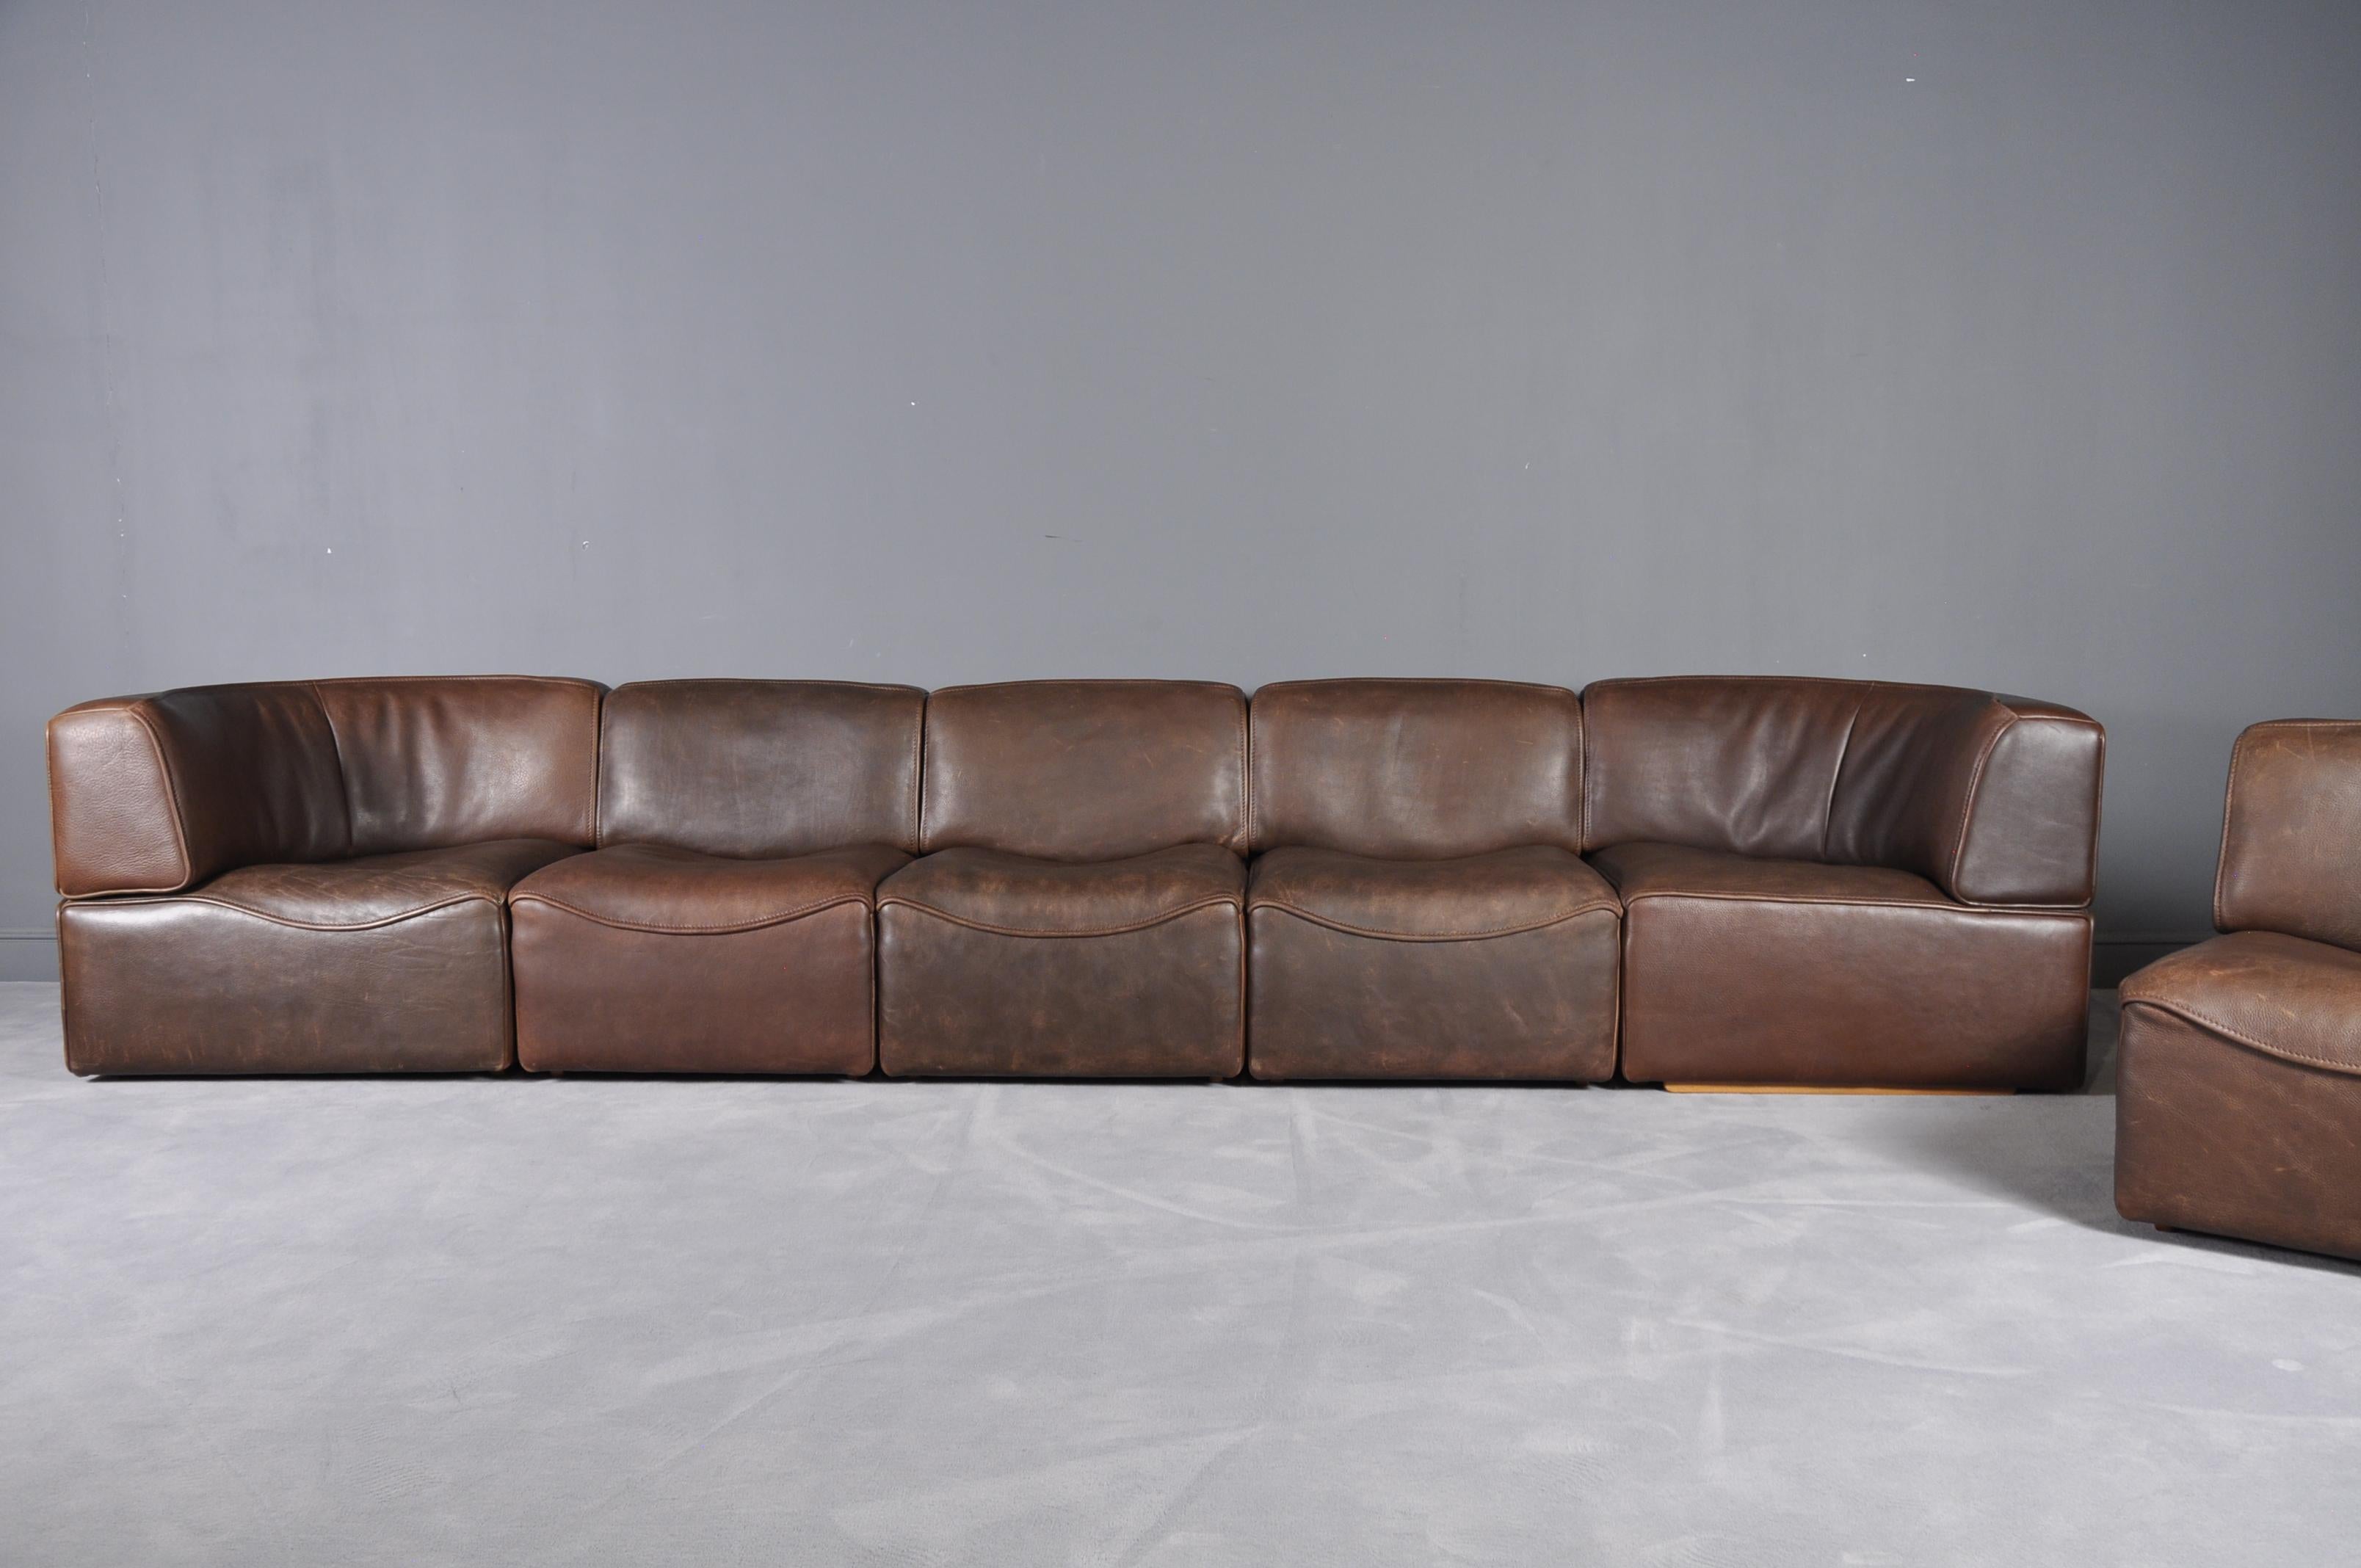 Sectional sofa model DS-15, in leather by De Sede, Switzerland, 1970s. This sectional sofa contains two corner elements, four normal elements. The section make it possible to arrange this sofa to your own wishes. The design is simplistic yet